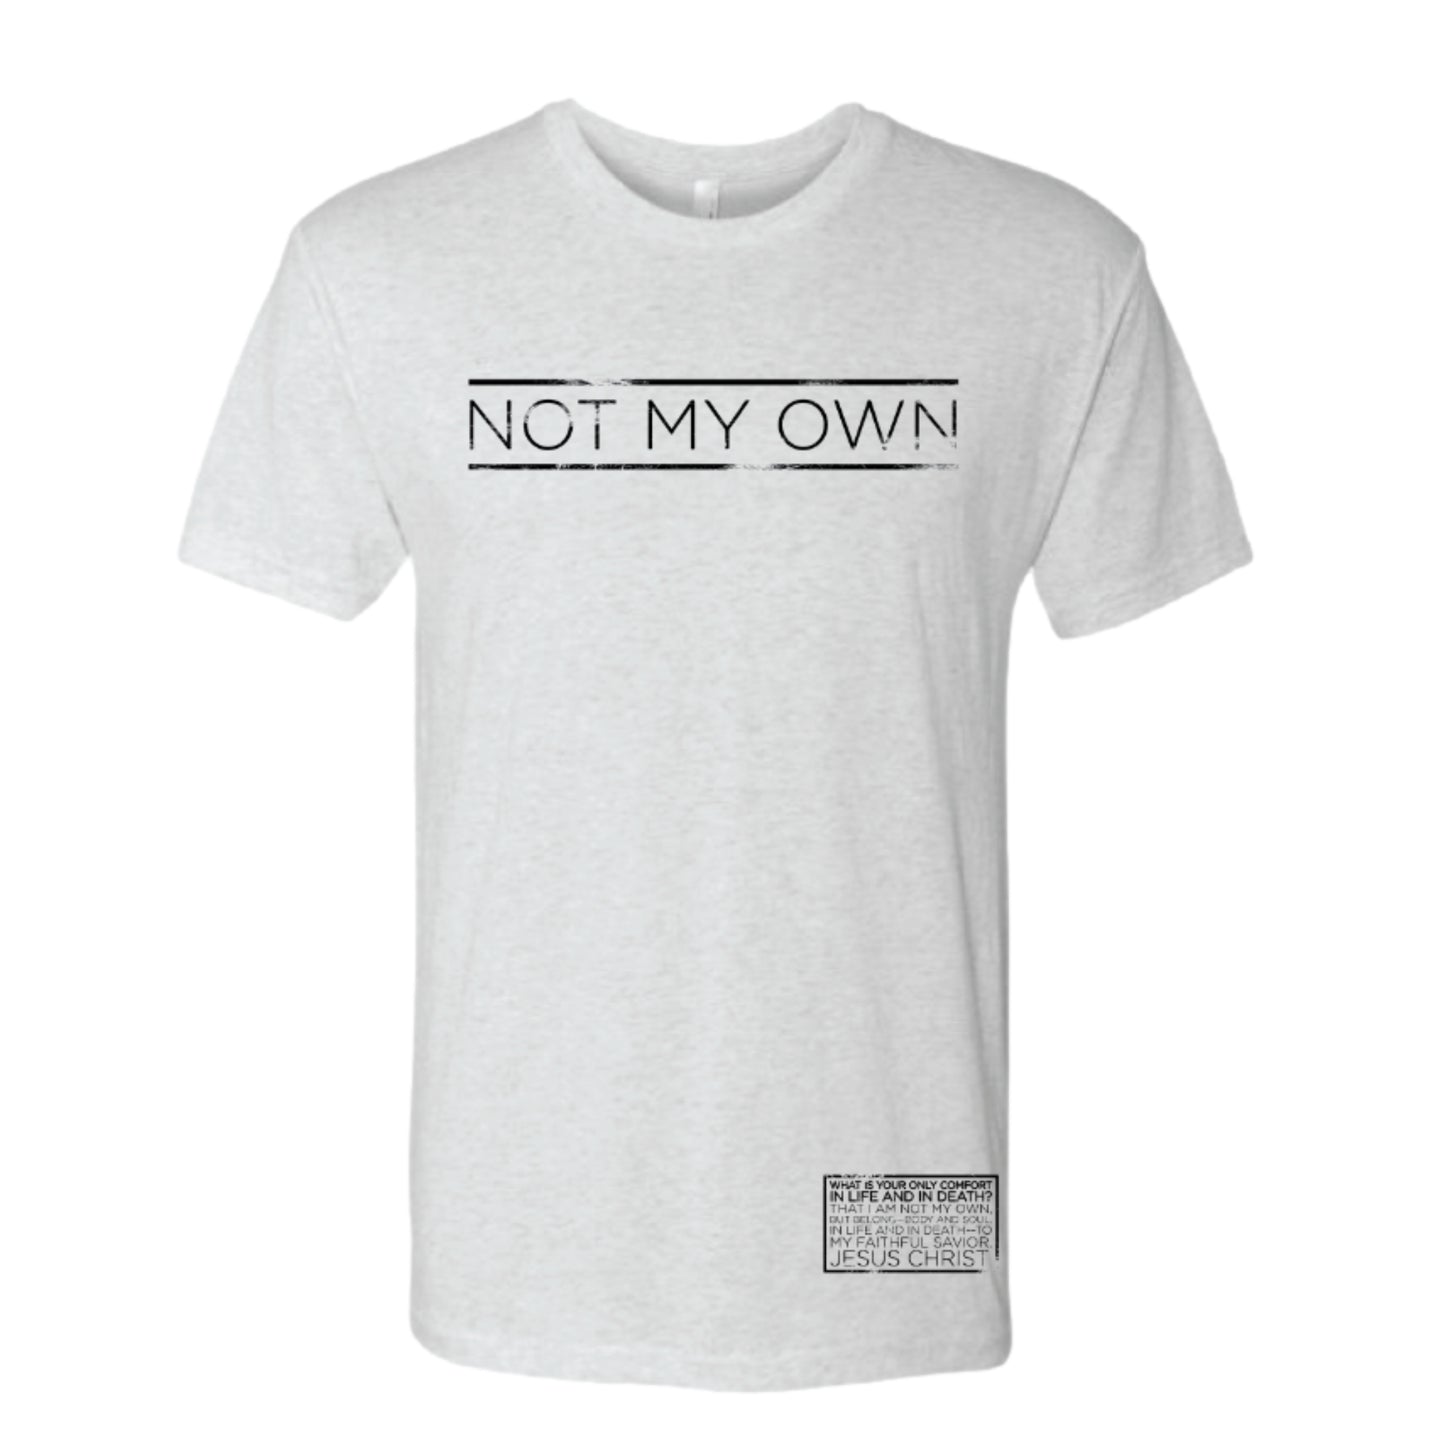 Not My Own Tee